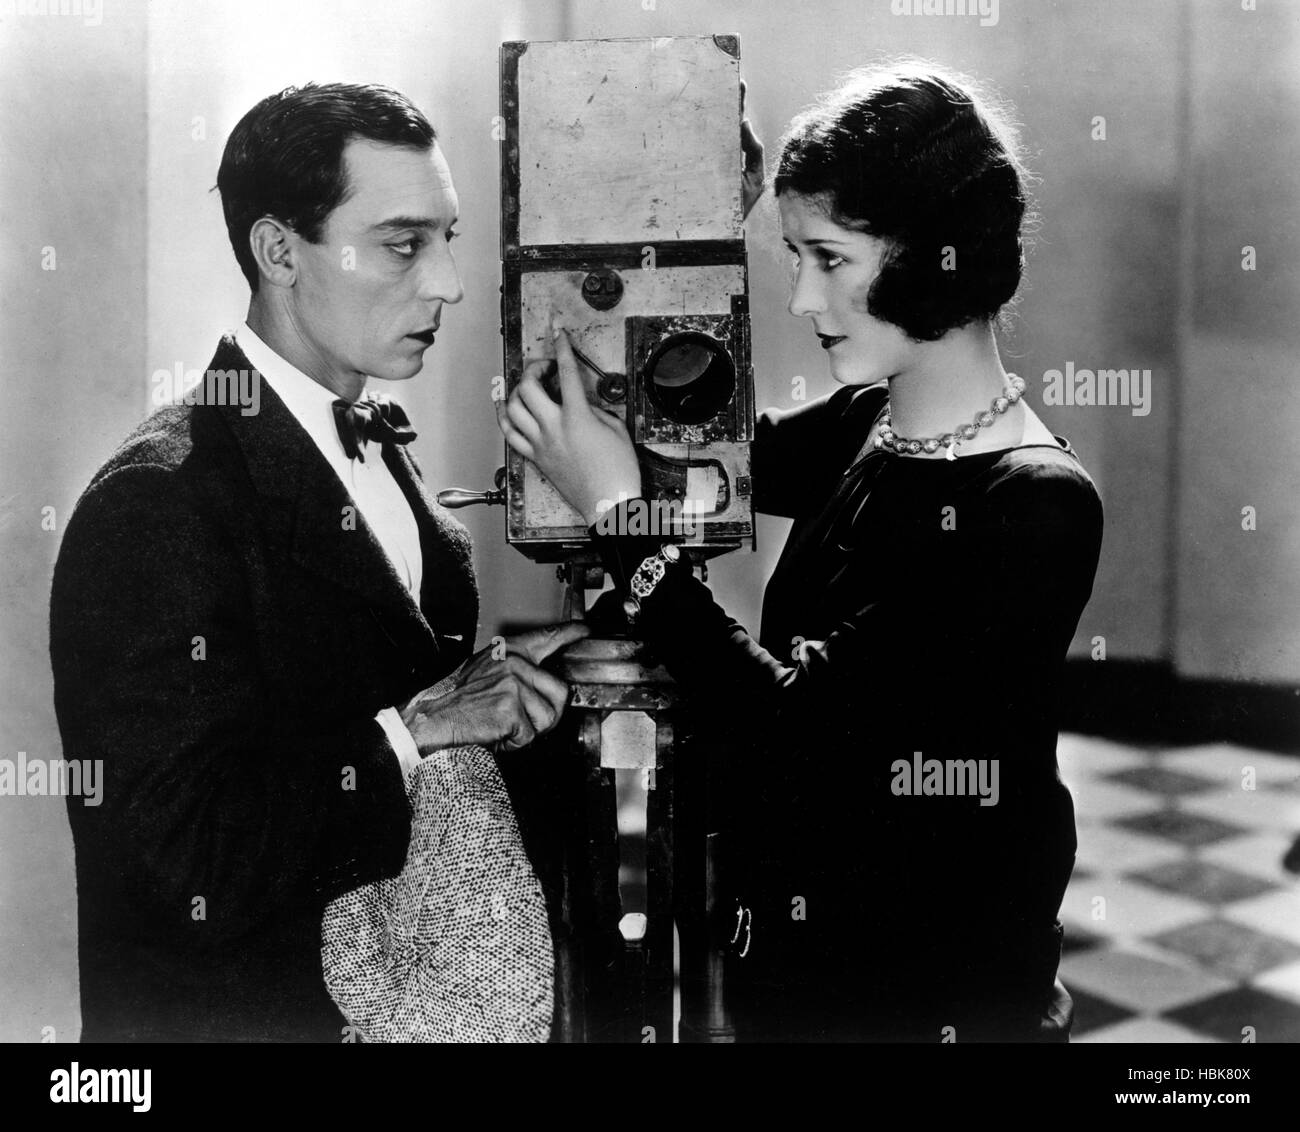 THE CAMERAMAN, Buster Keaton, Marceline Day, 1928 Stock Photo - Alamy